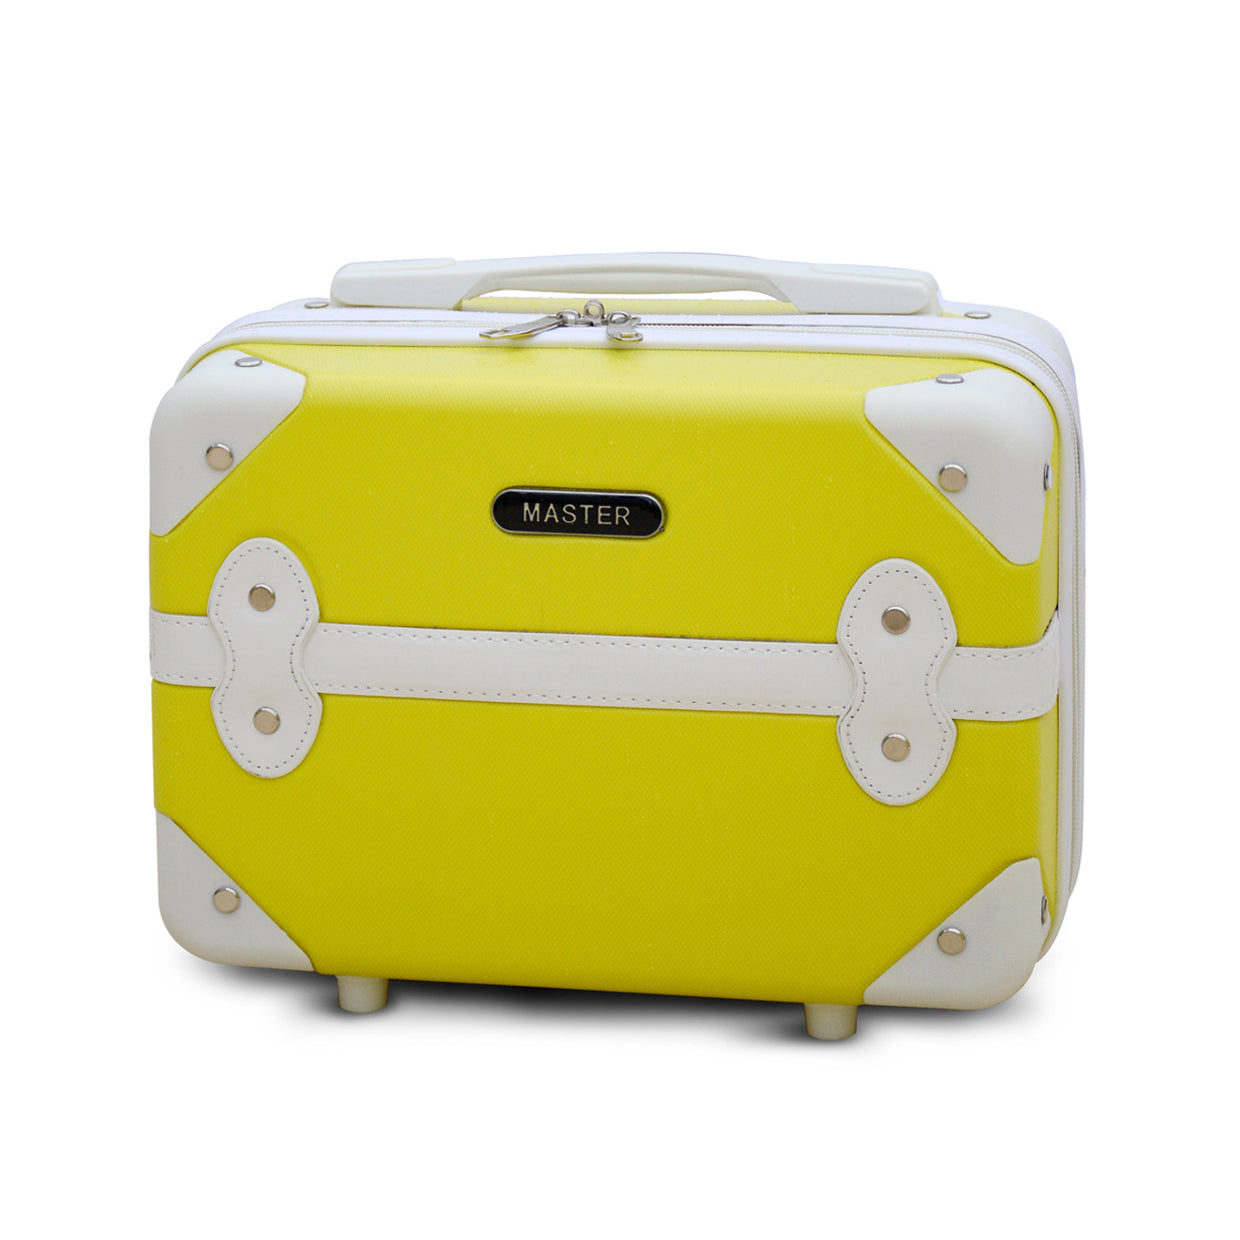 lightweight yellow spinner luggage full set and single piece beauty bag